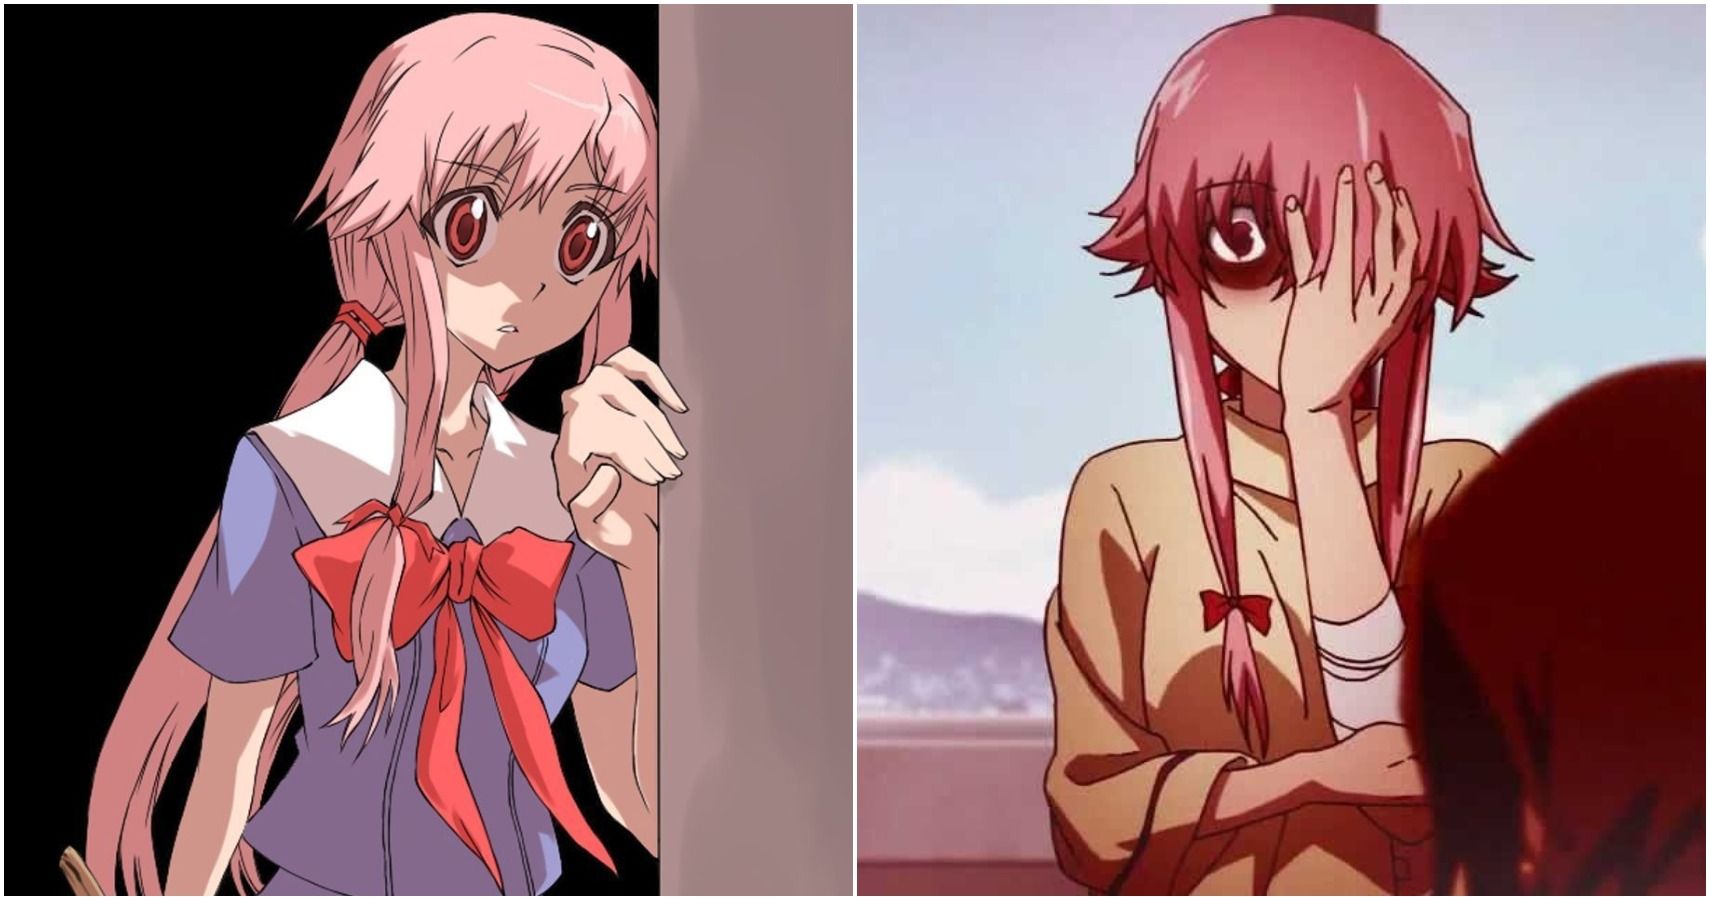 Are there any other anime's with Yanderes like Yuno Gasai from